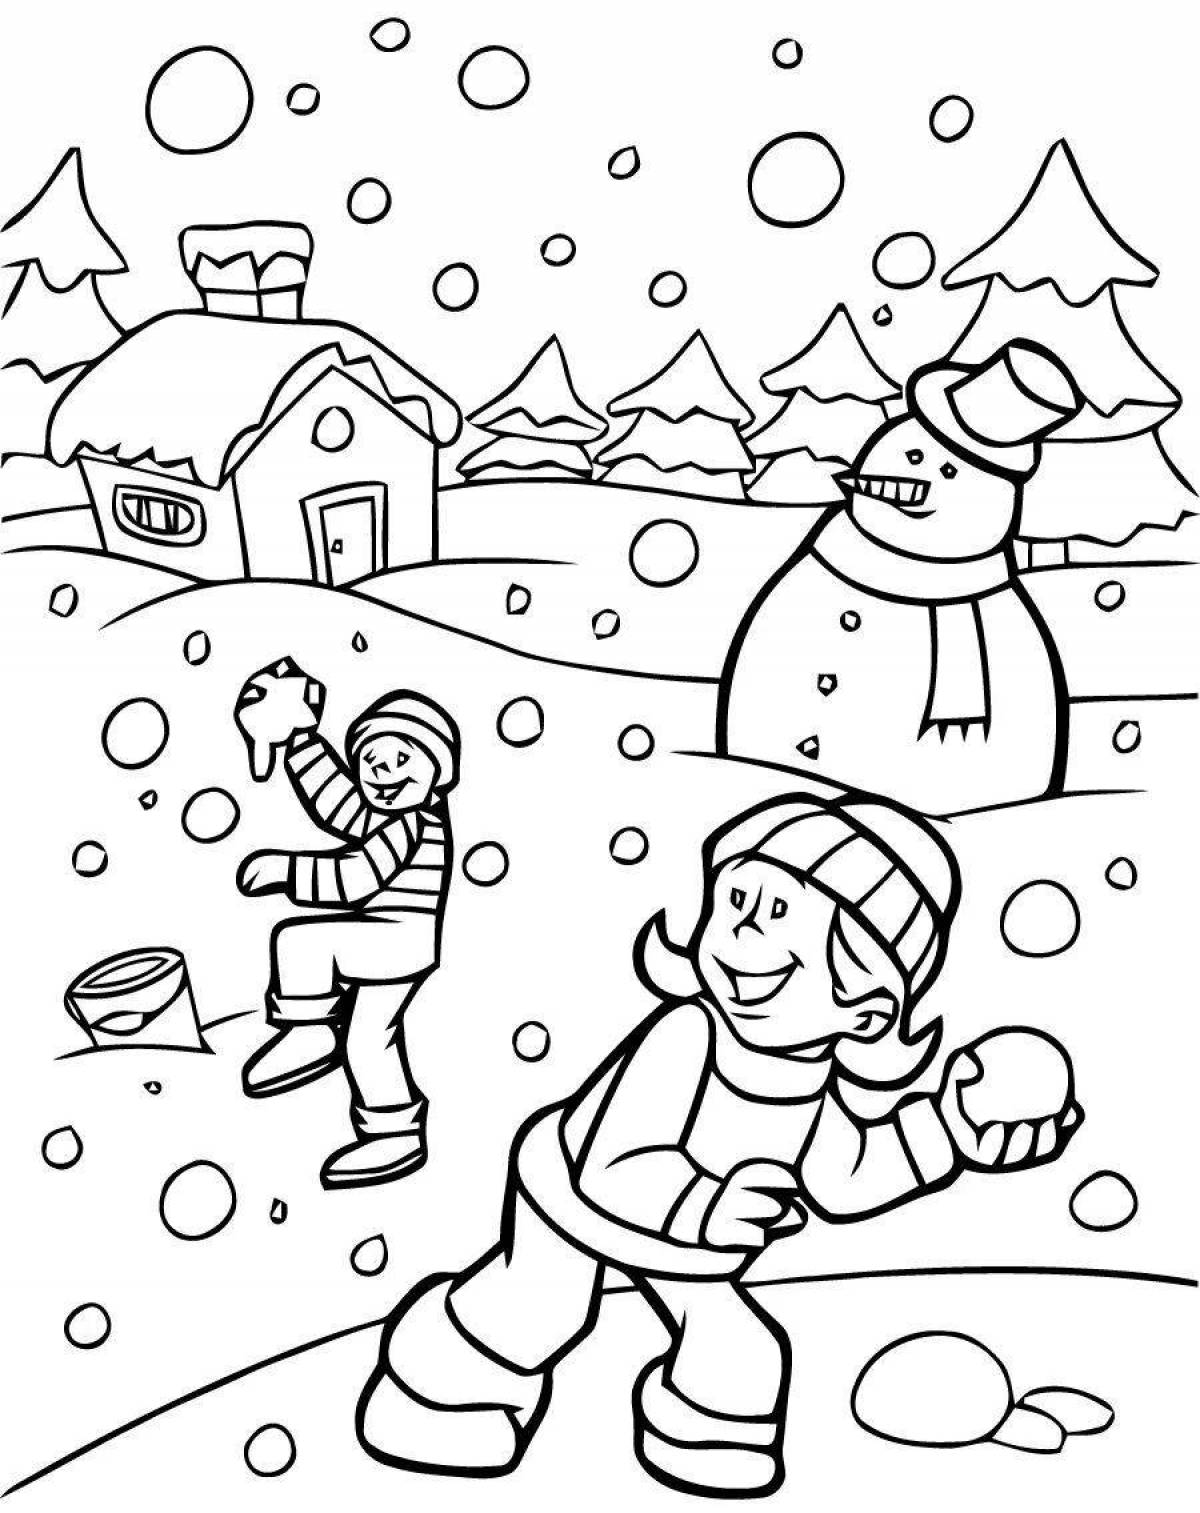 Exquisite january coloring book for kids